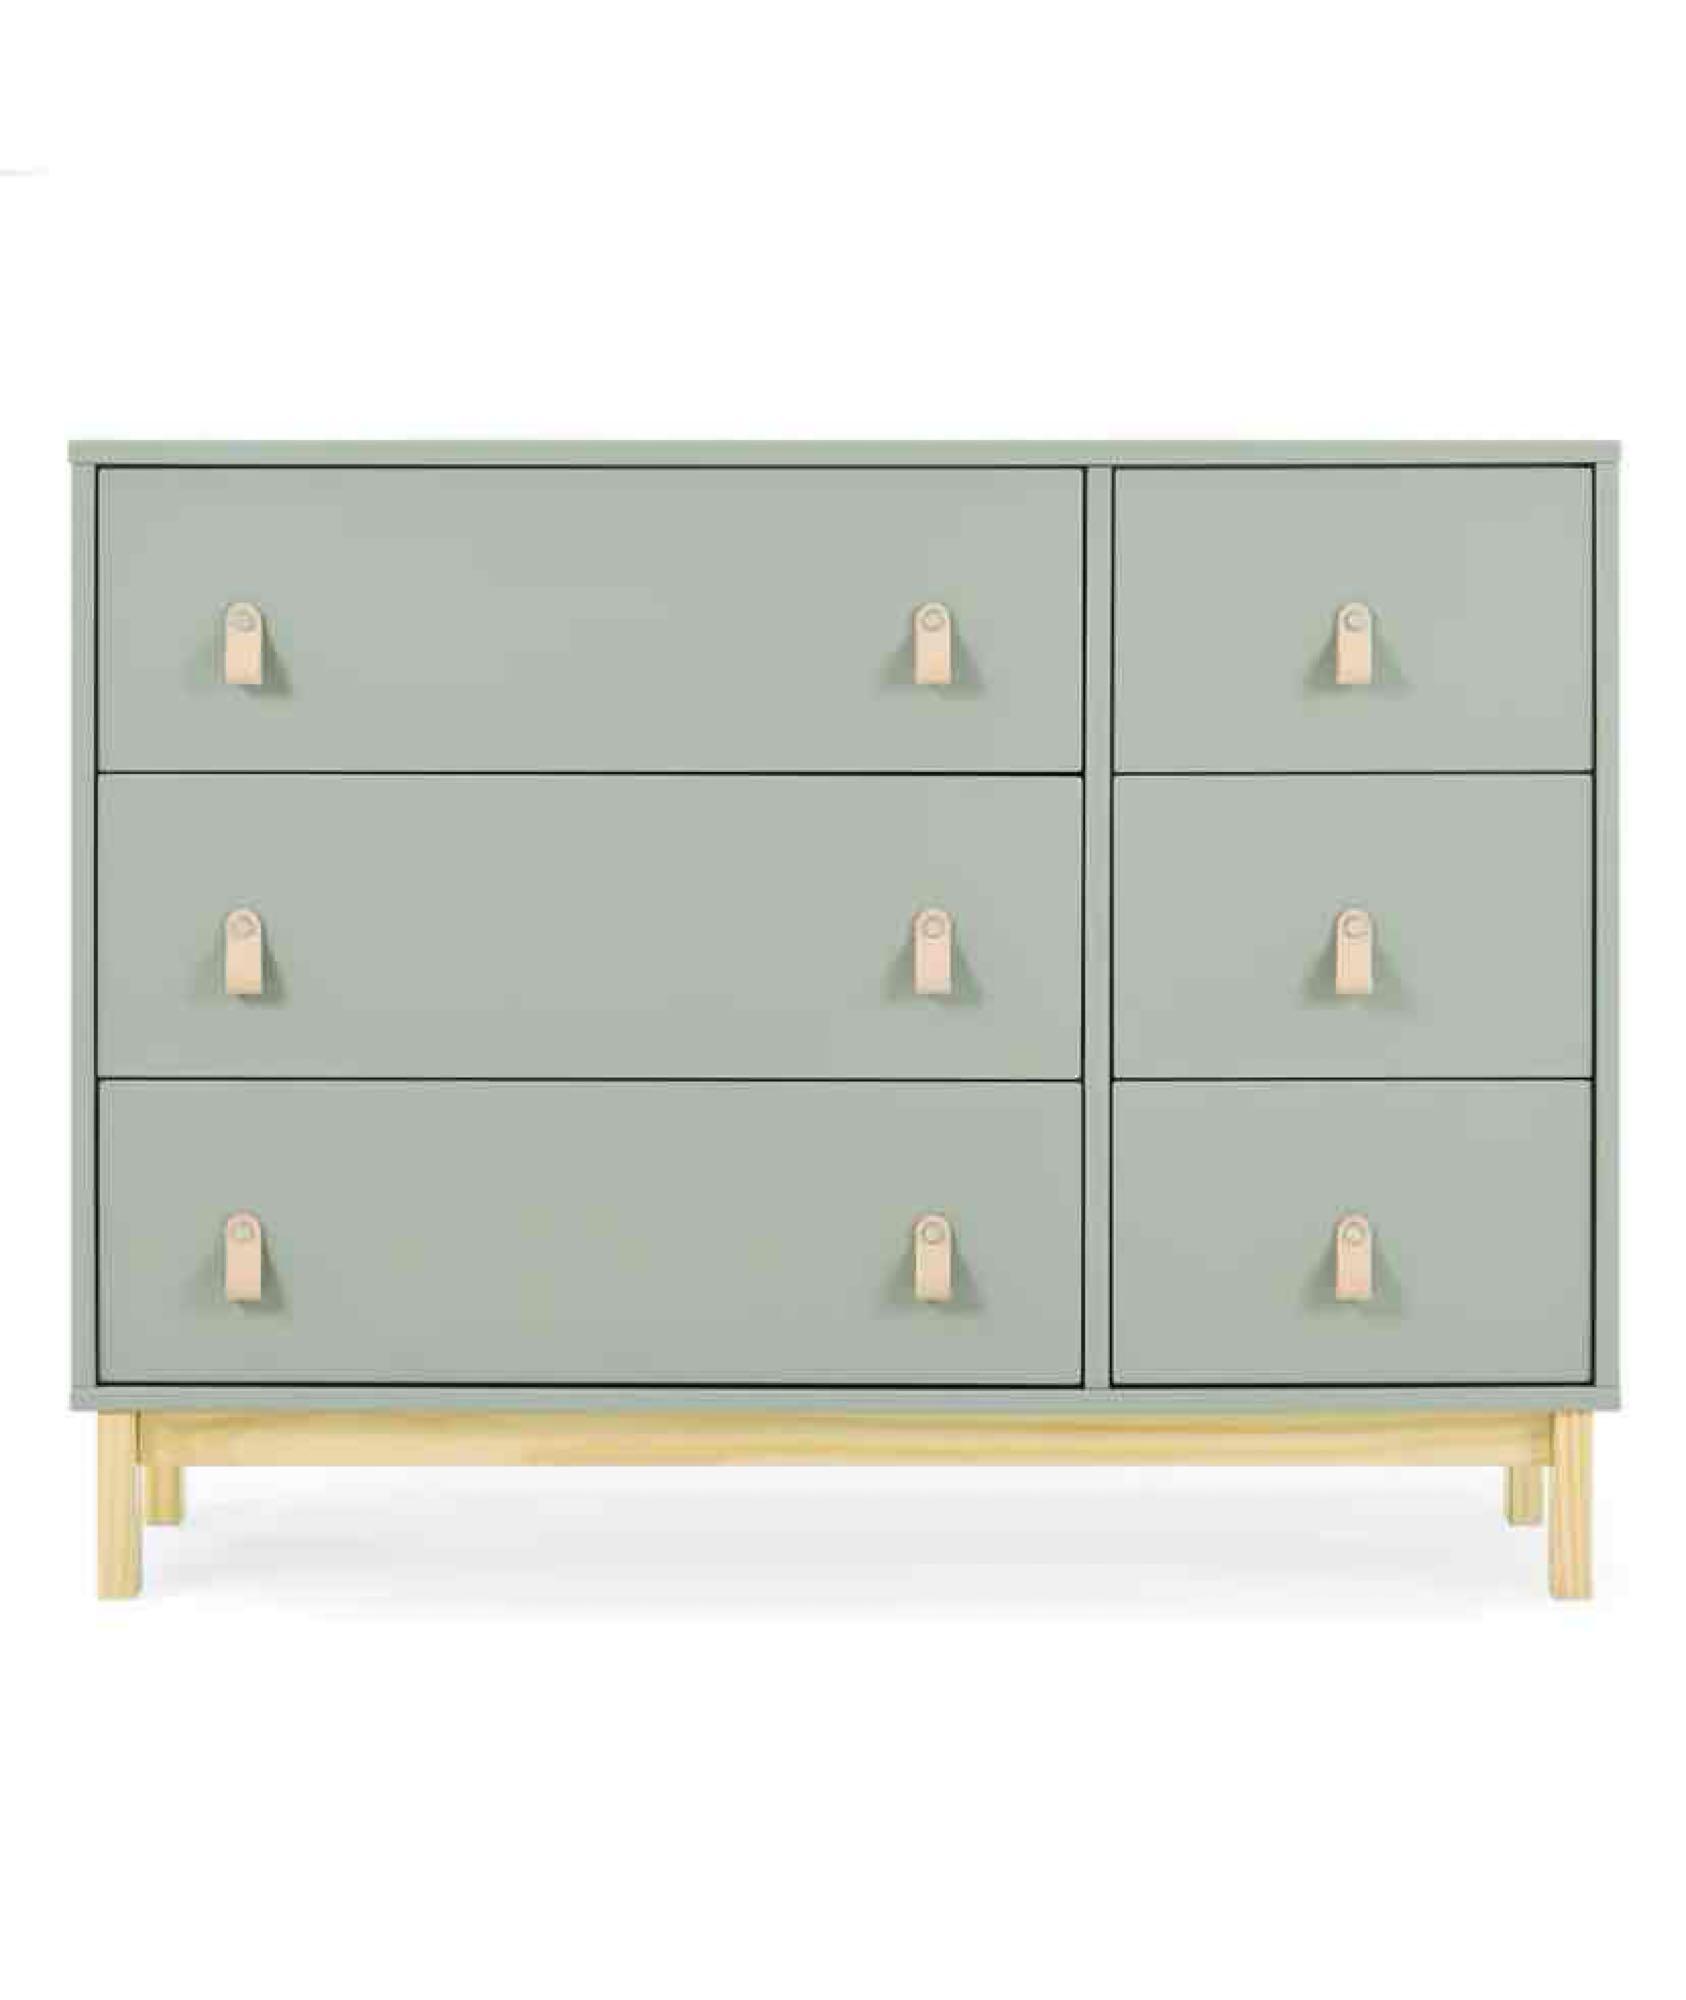 babyGap Legacy 6 Drawer Dresser with Leather Pulls